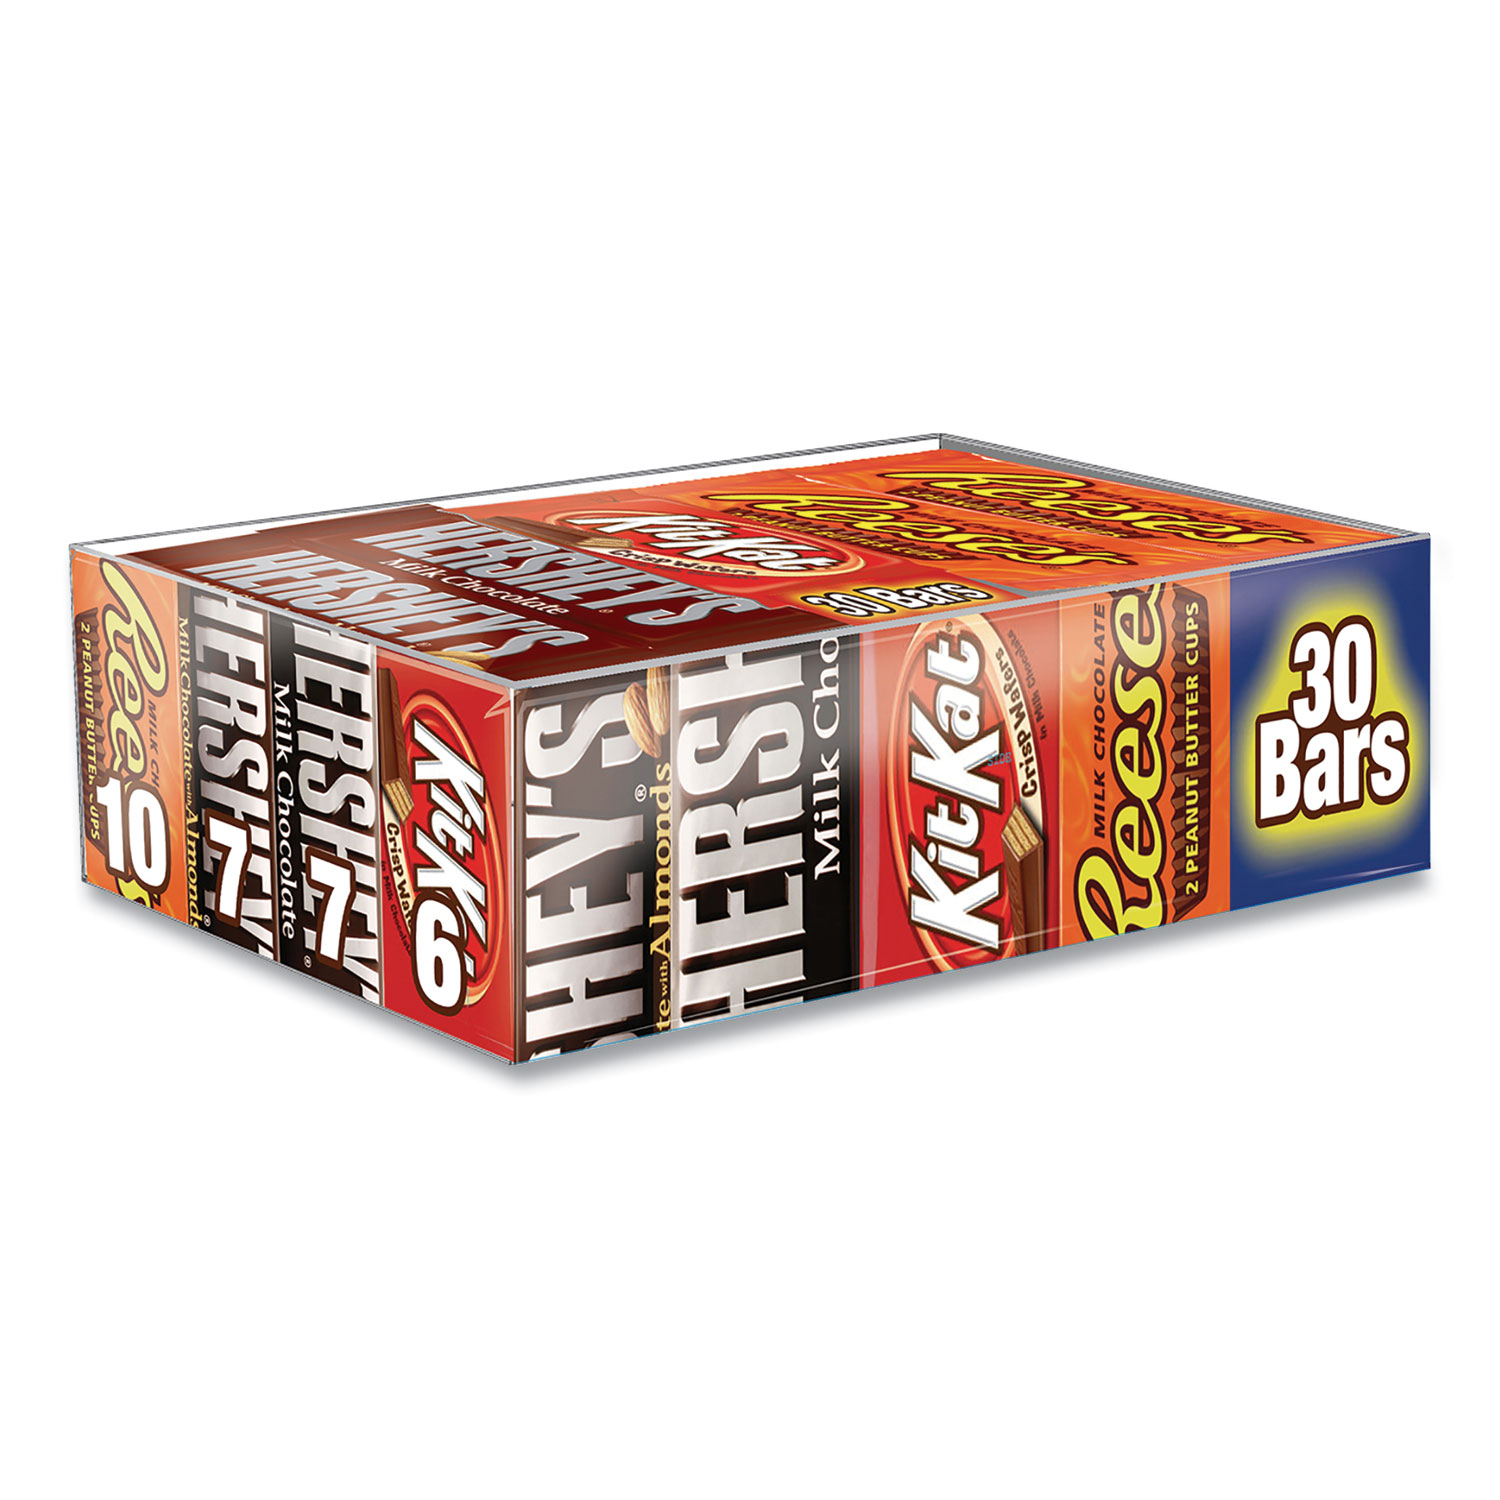  Hershey's 20650 Full Size Chocolate Candy Bar Variety Pack, Assorted 1.5 oz Bar, 30 Bars/Box, Free Delivery in 1-4 Business Days (GRR24600031) 